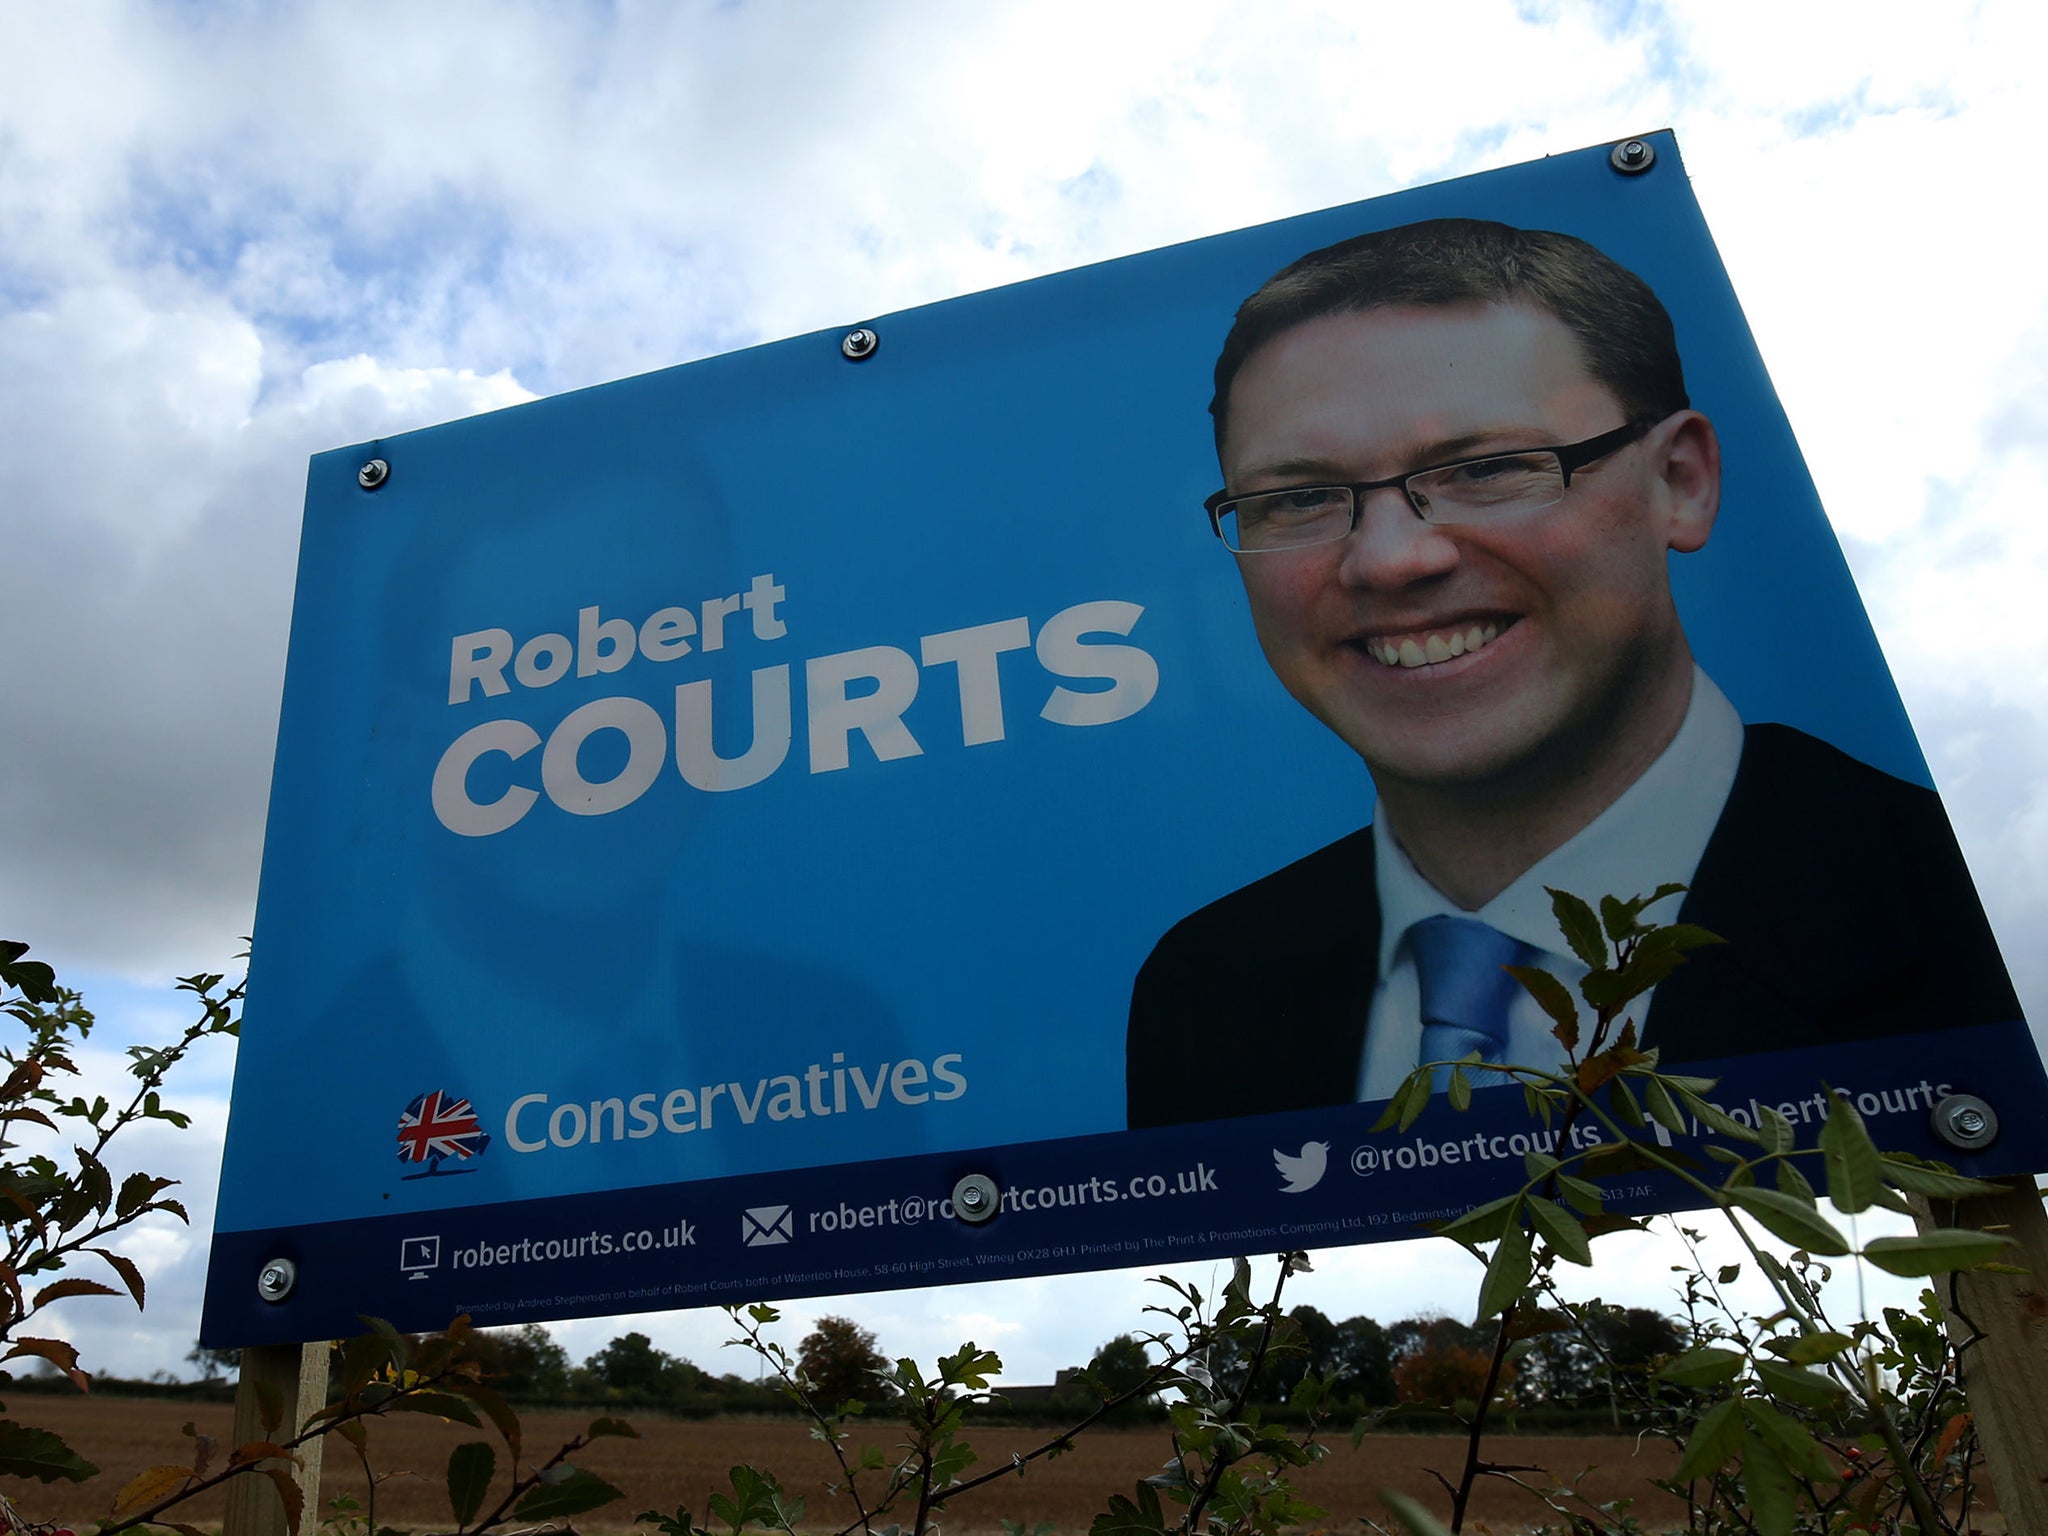 The Conservatives' Robert Courts beat off 13 rivals to claim victory in a by-election in Witney